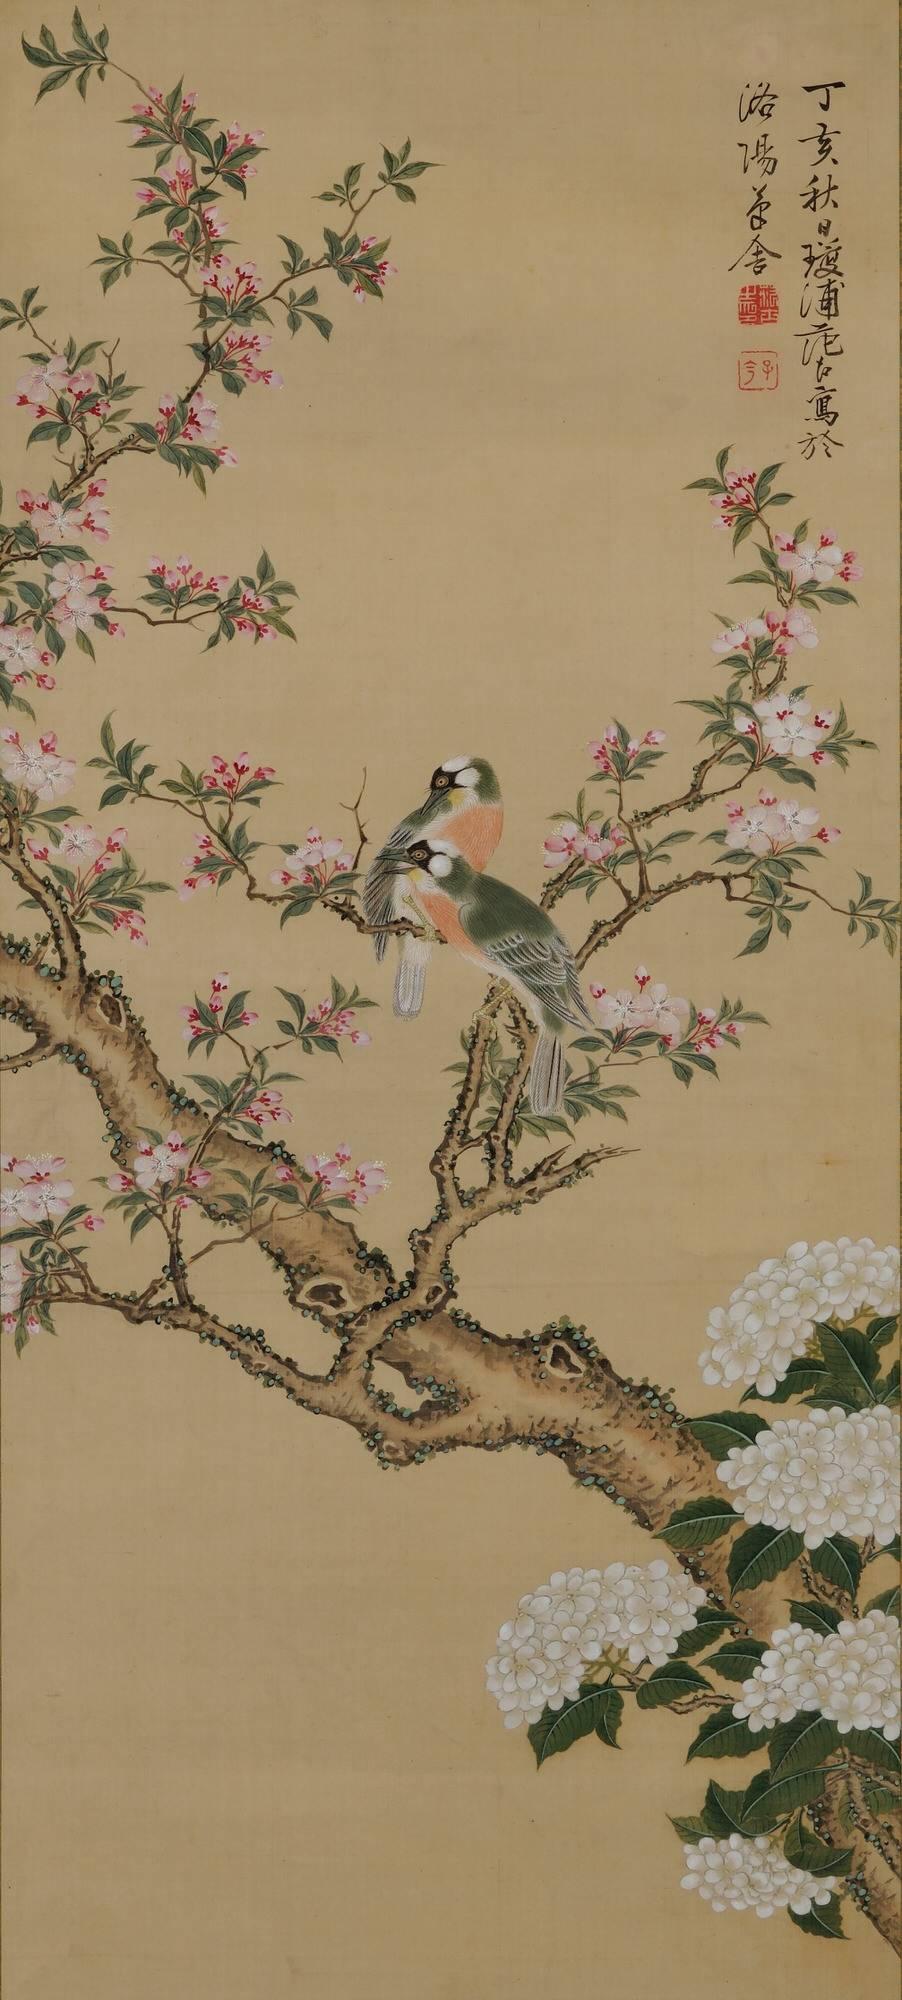 Anonymous
“Spring flowers and birds”
Hanging scroll, ink and color on silk
Dimensions:
Scroll: 180 cm x 53 cm (71’’ x 21’’)
Image: 92 cm x 41 cm (36’’ x 16’’)
Inscription:
“Year of the fire dog, Keiho” – (Keiho is a name for Nagasaki commonly